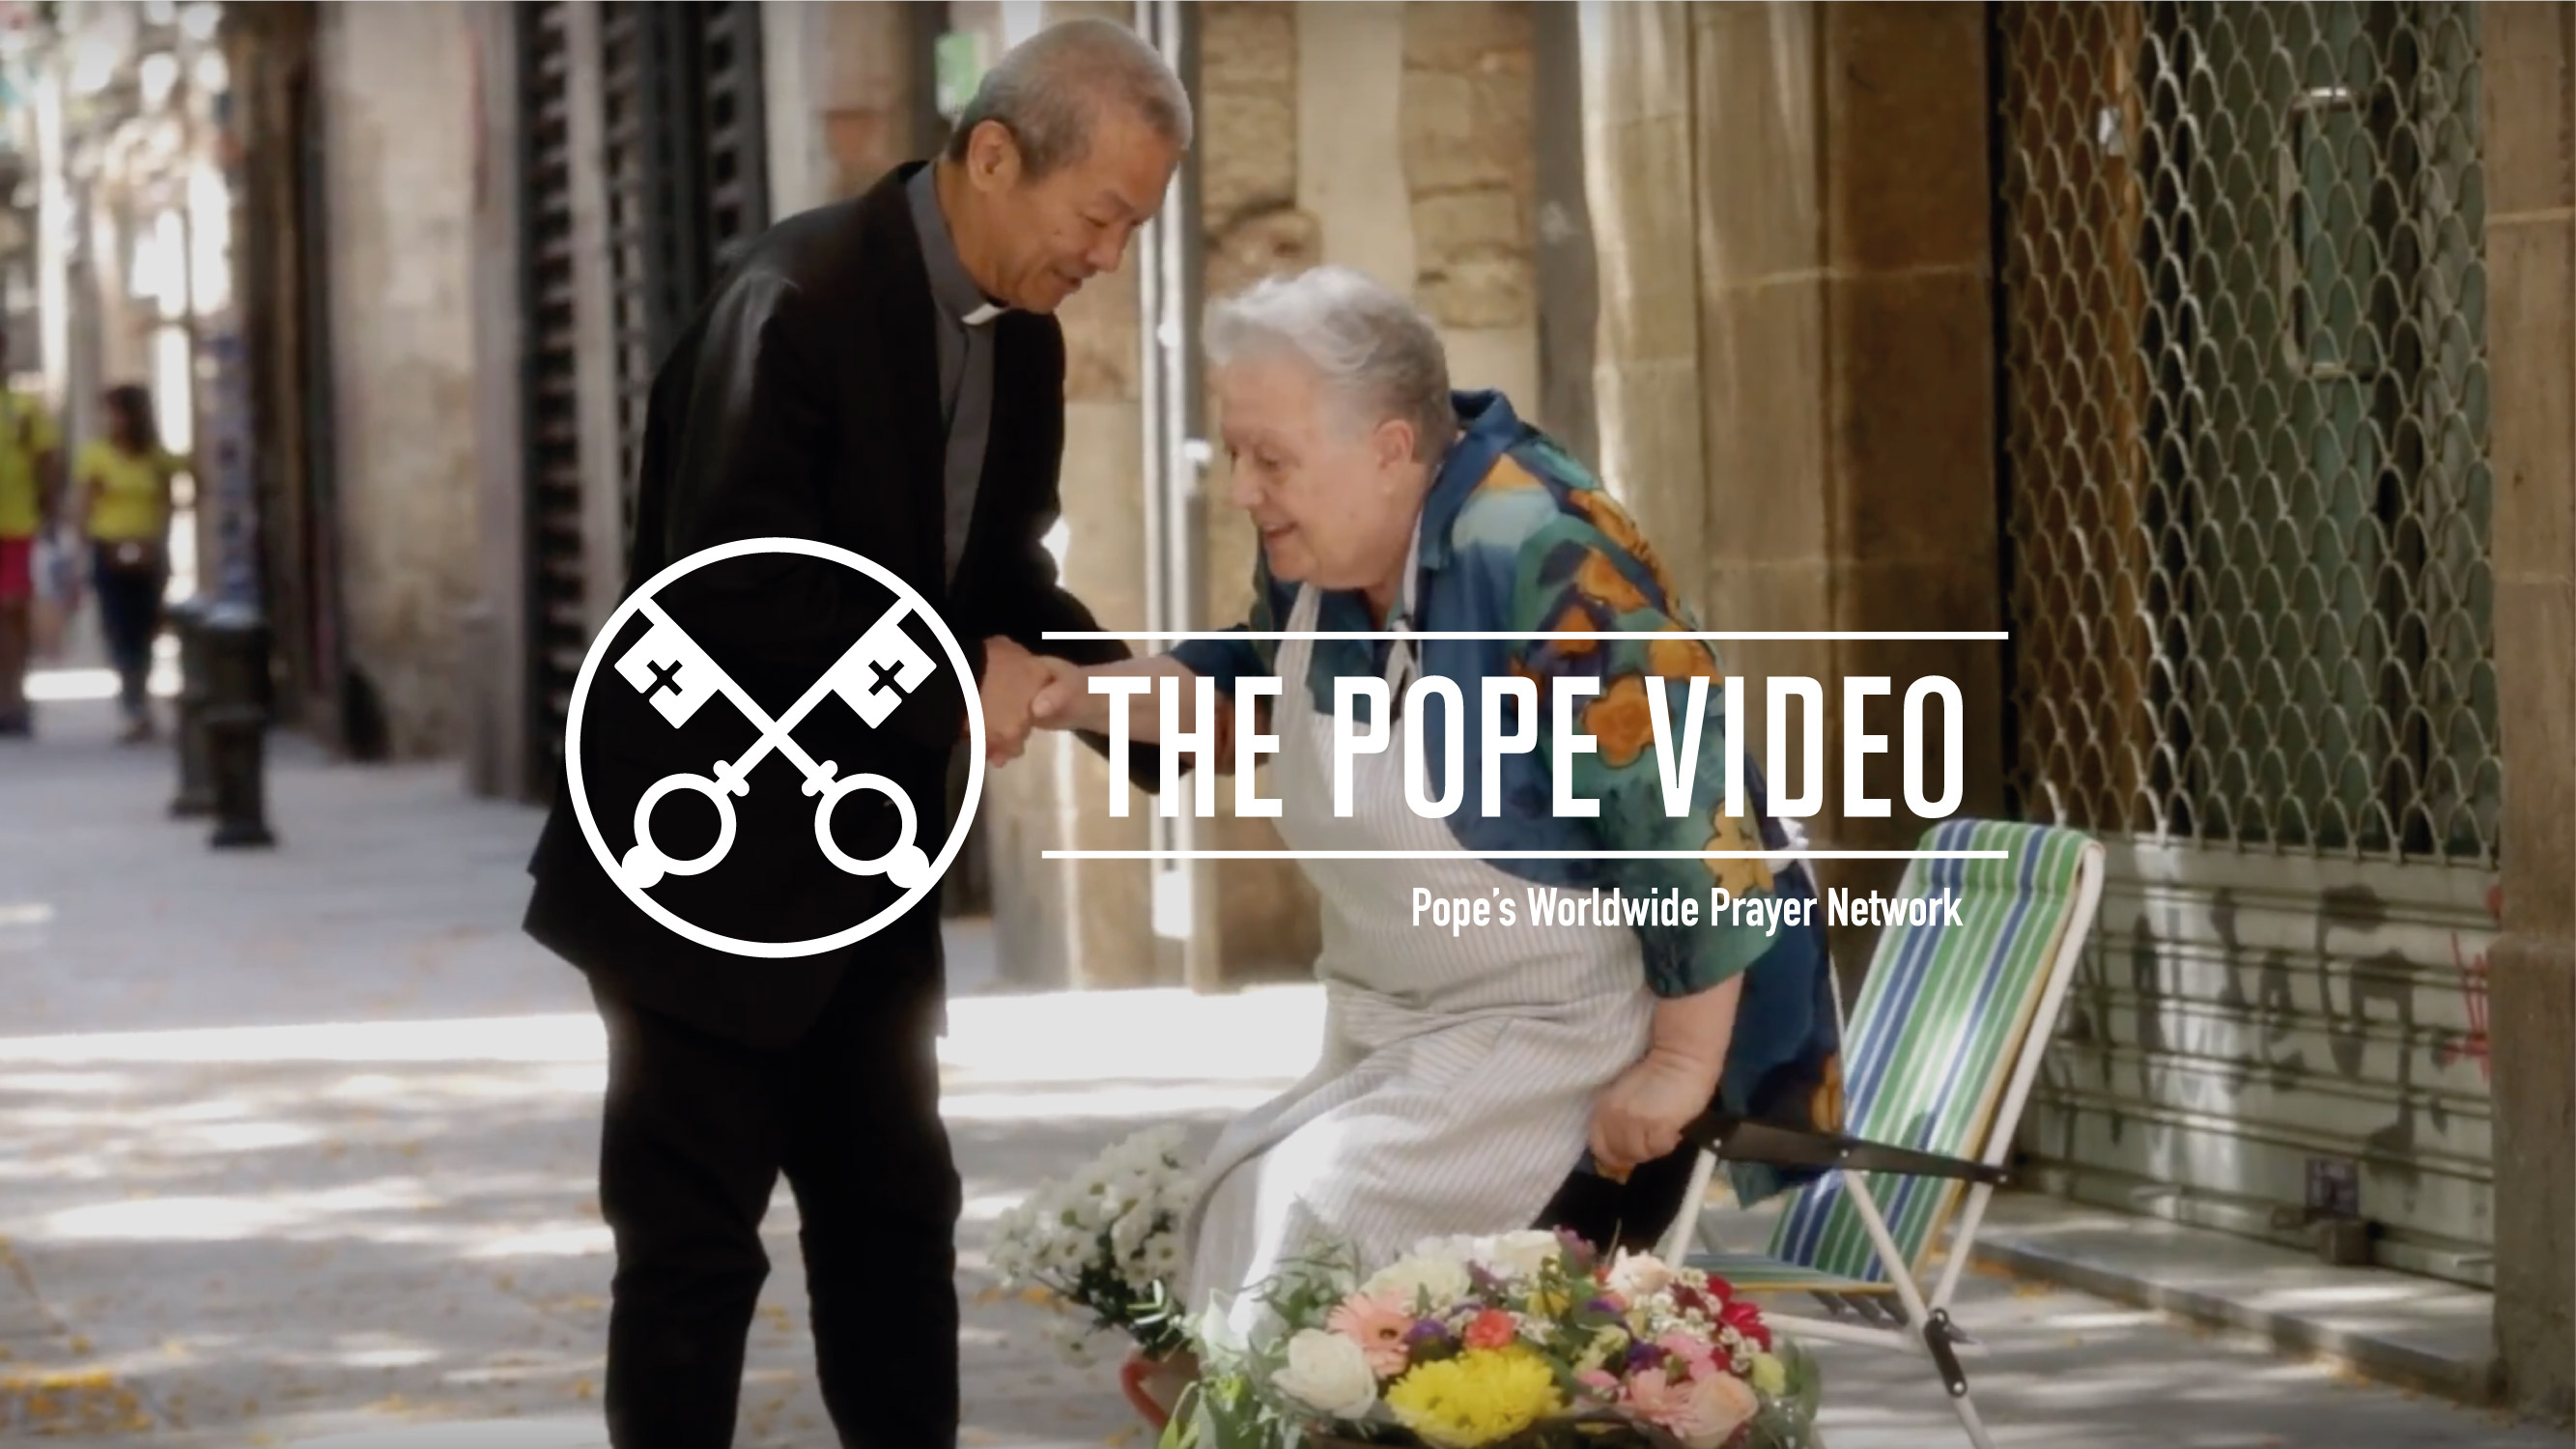 The Pope Video July 2018 (Official Image)